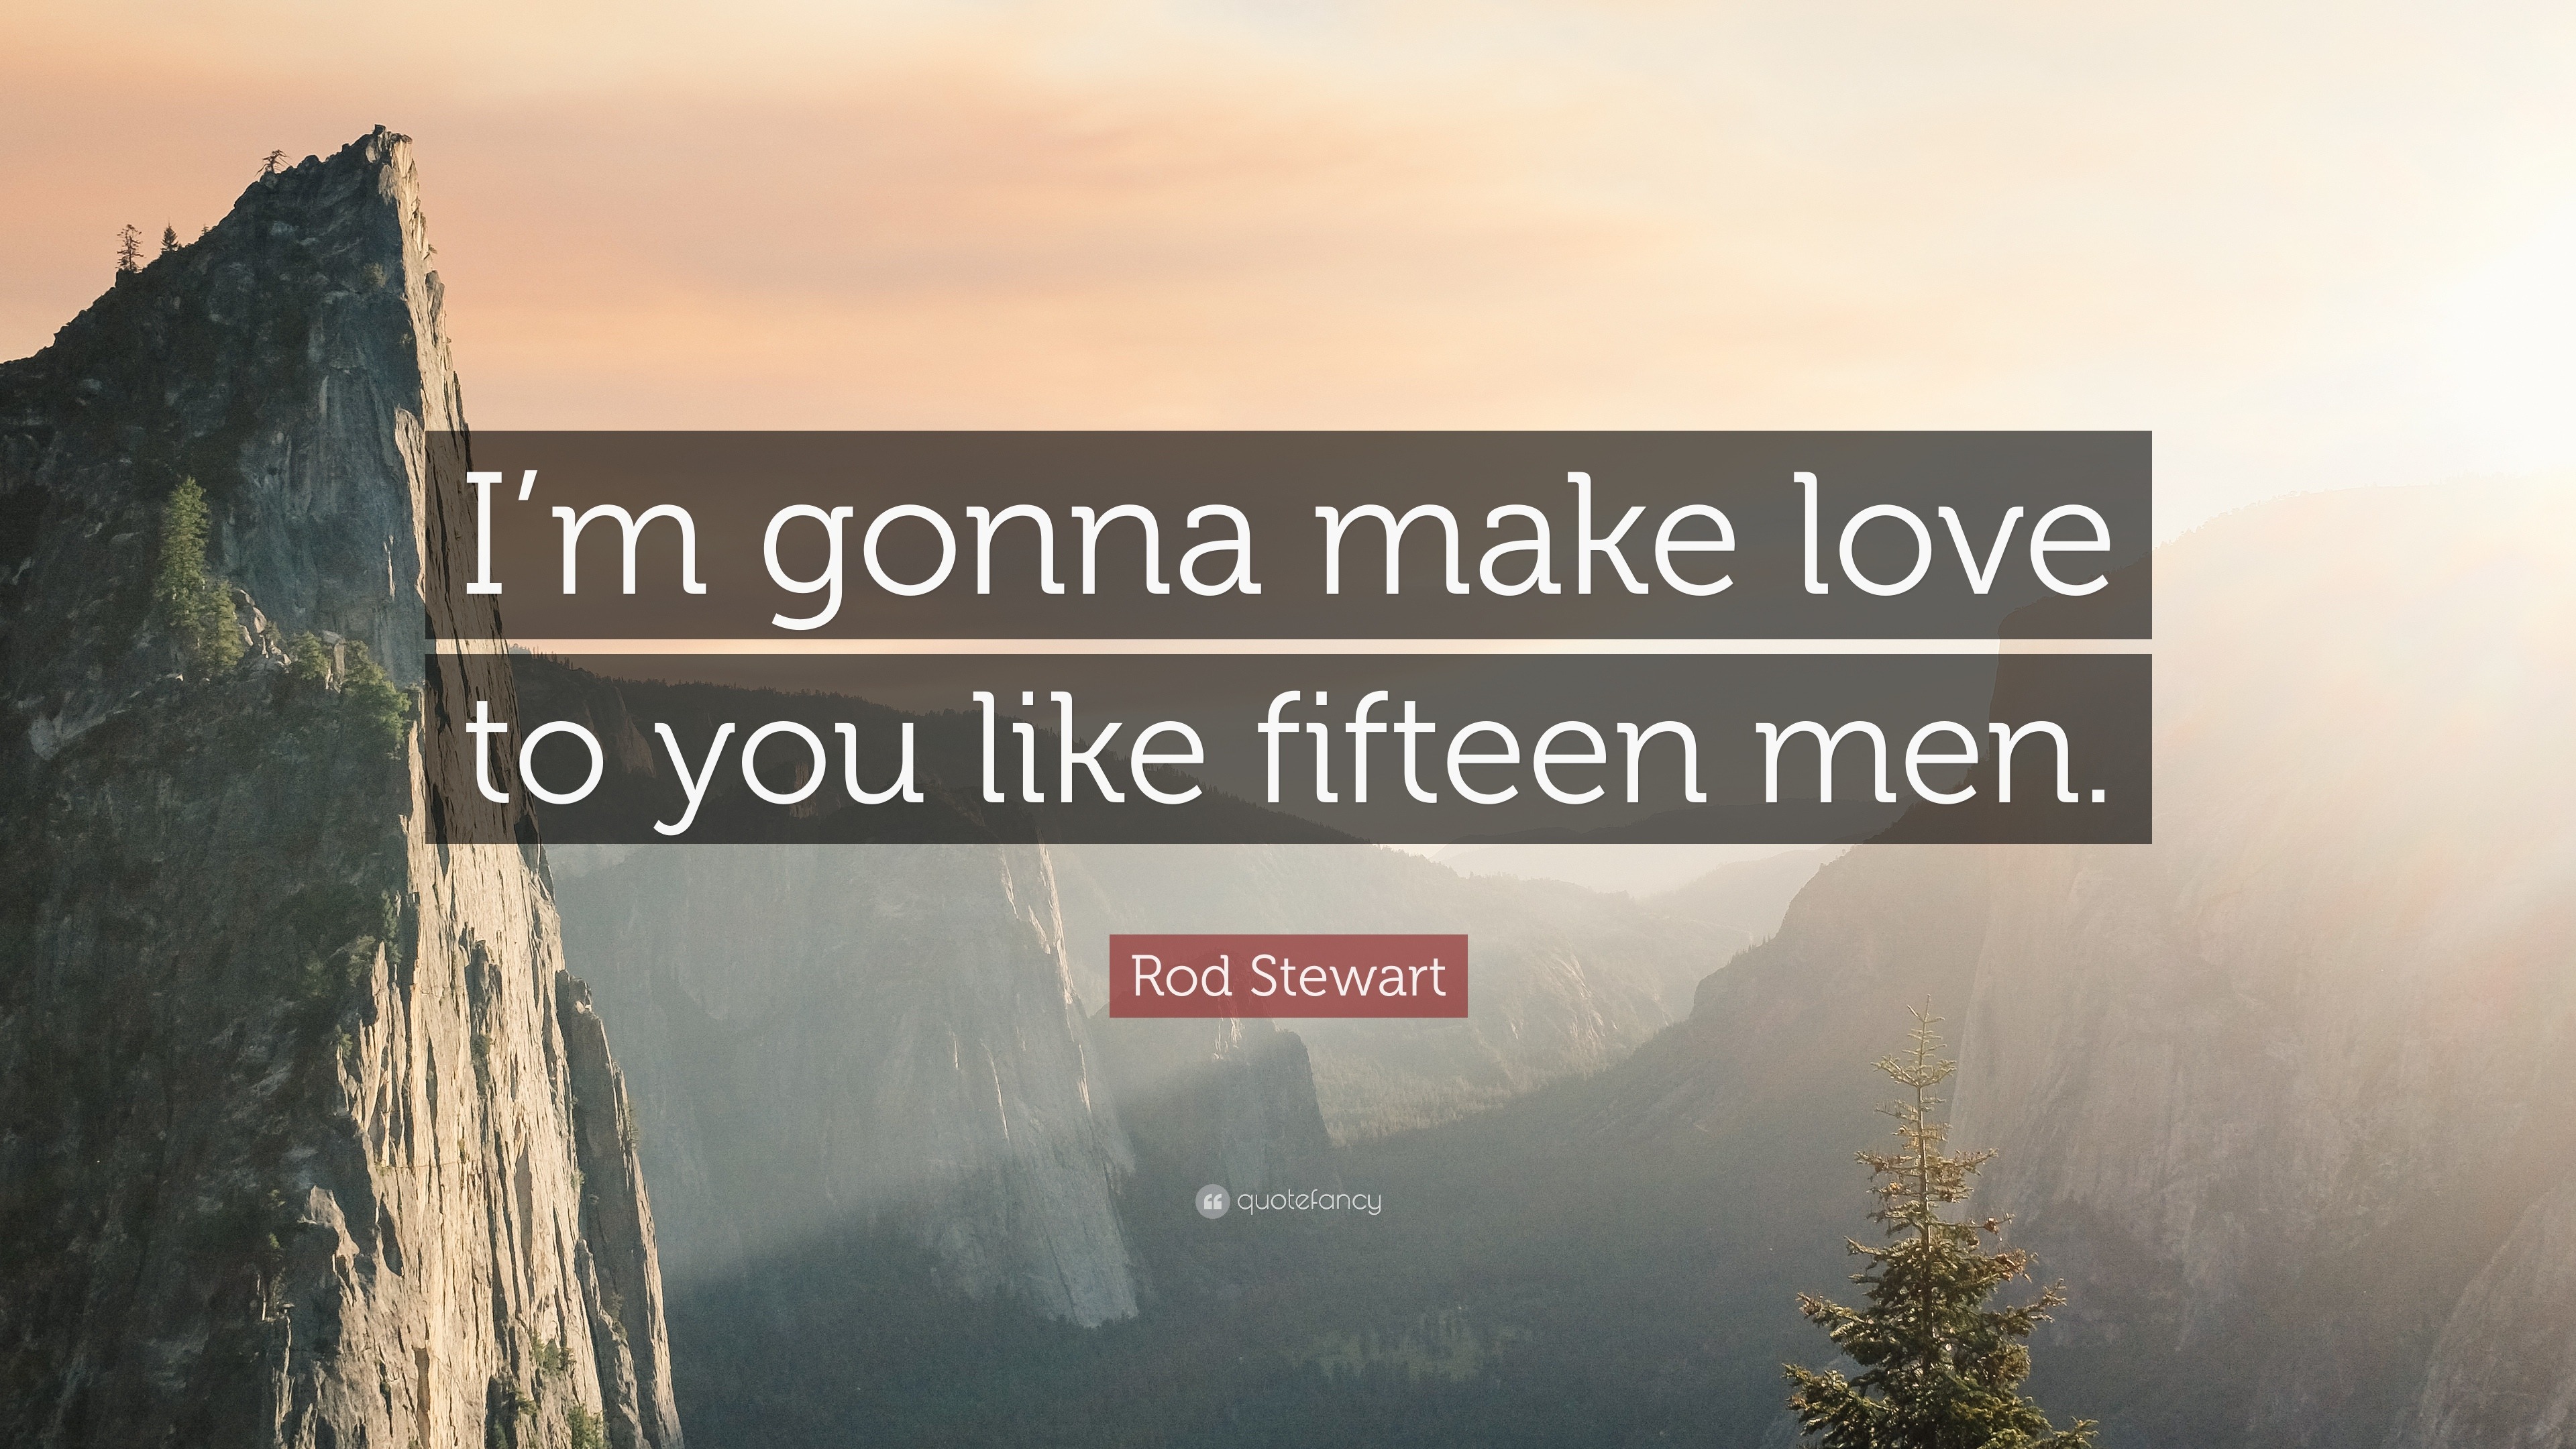 Rod Stewart Quote “I m gonna make love to you like fifteen men